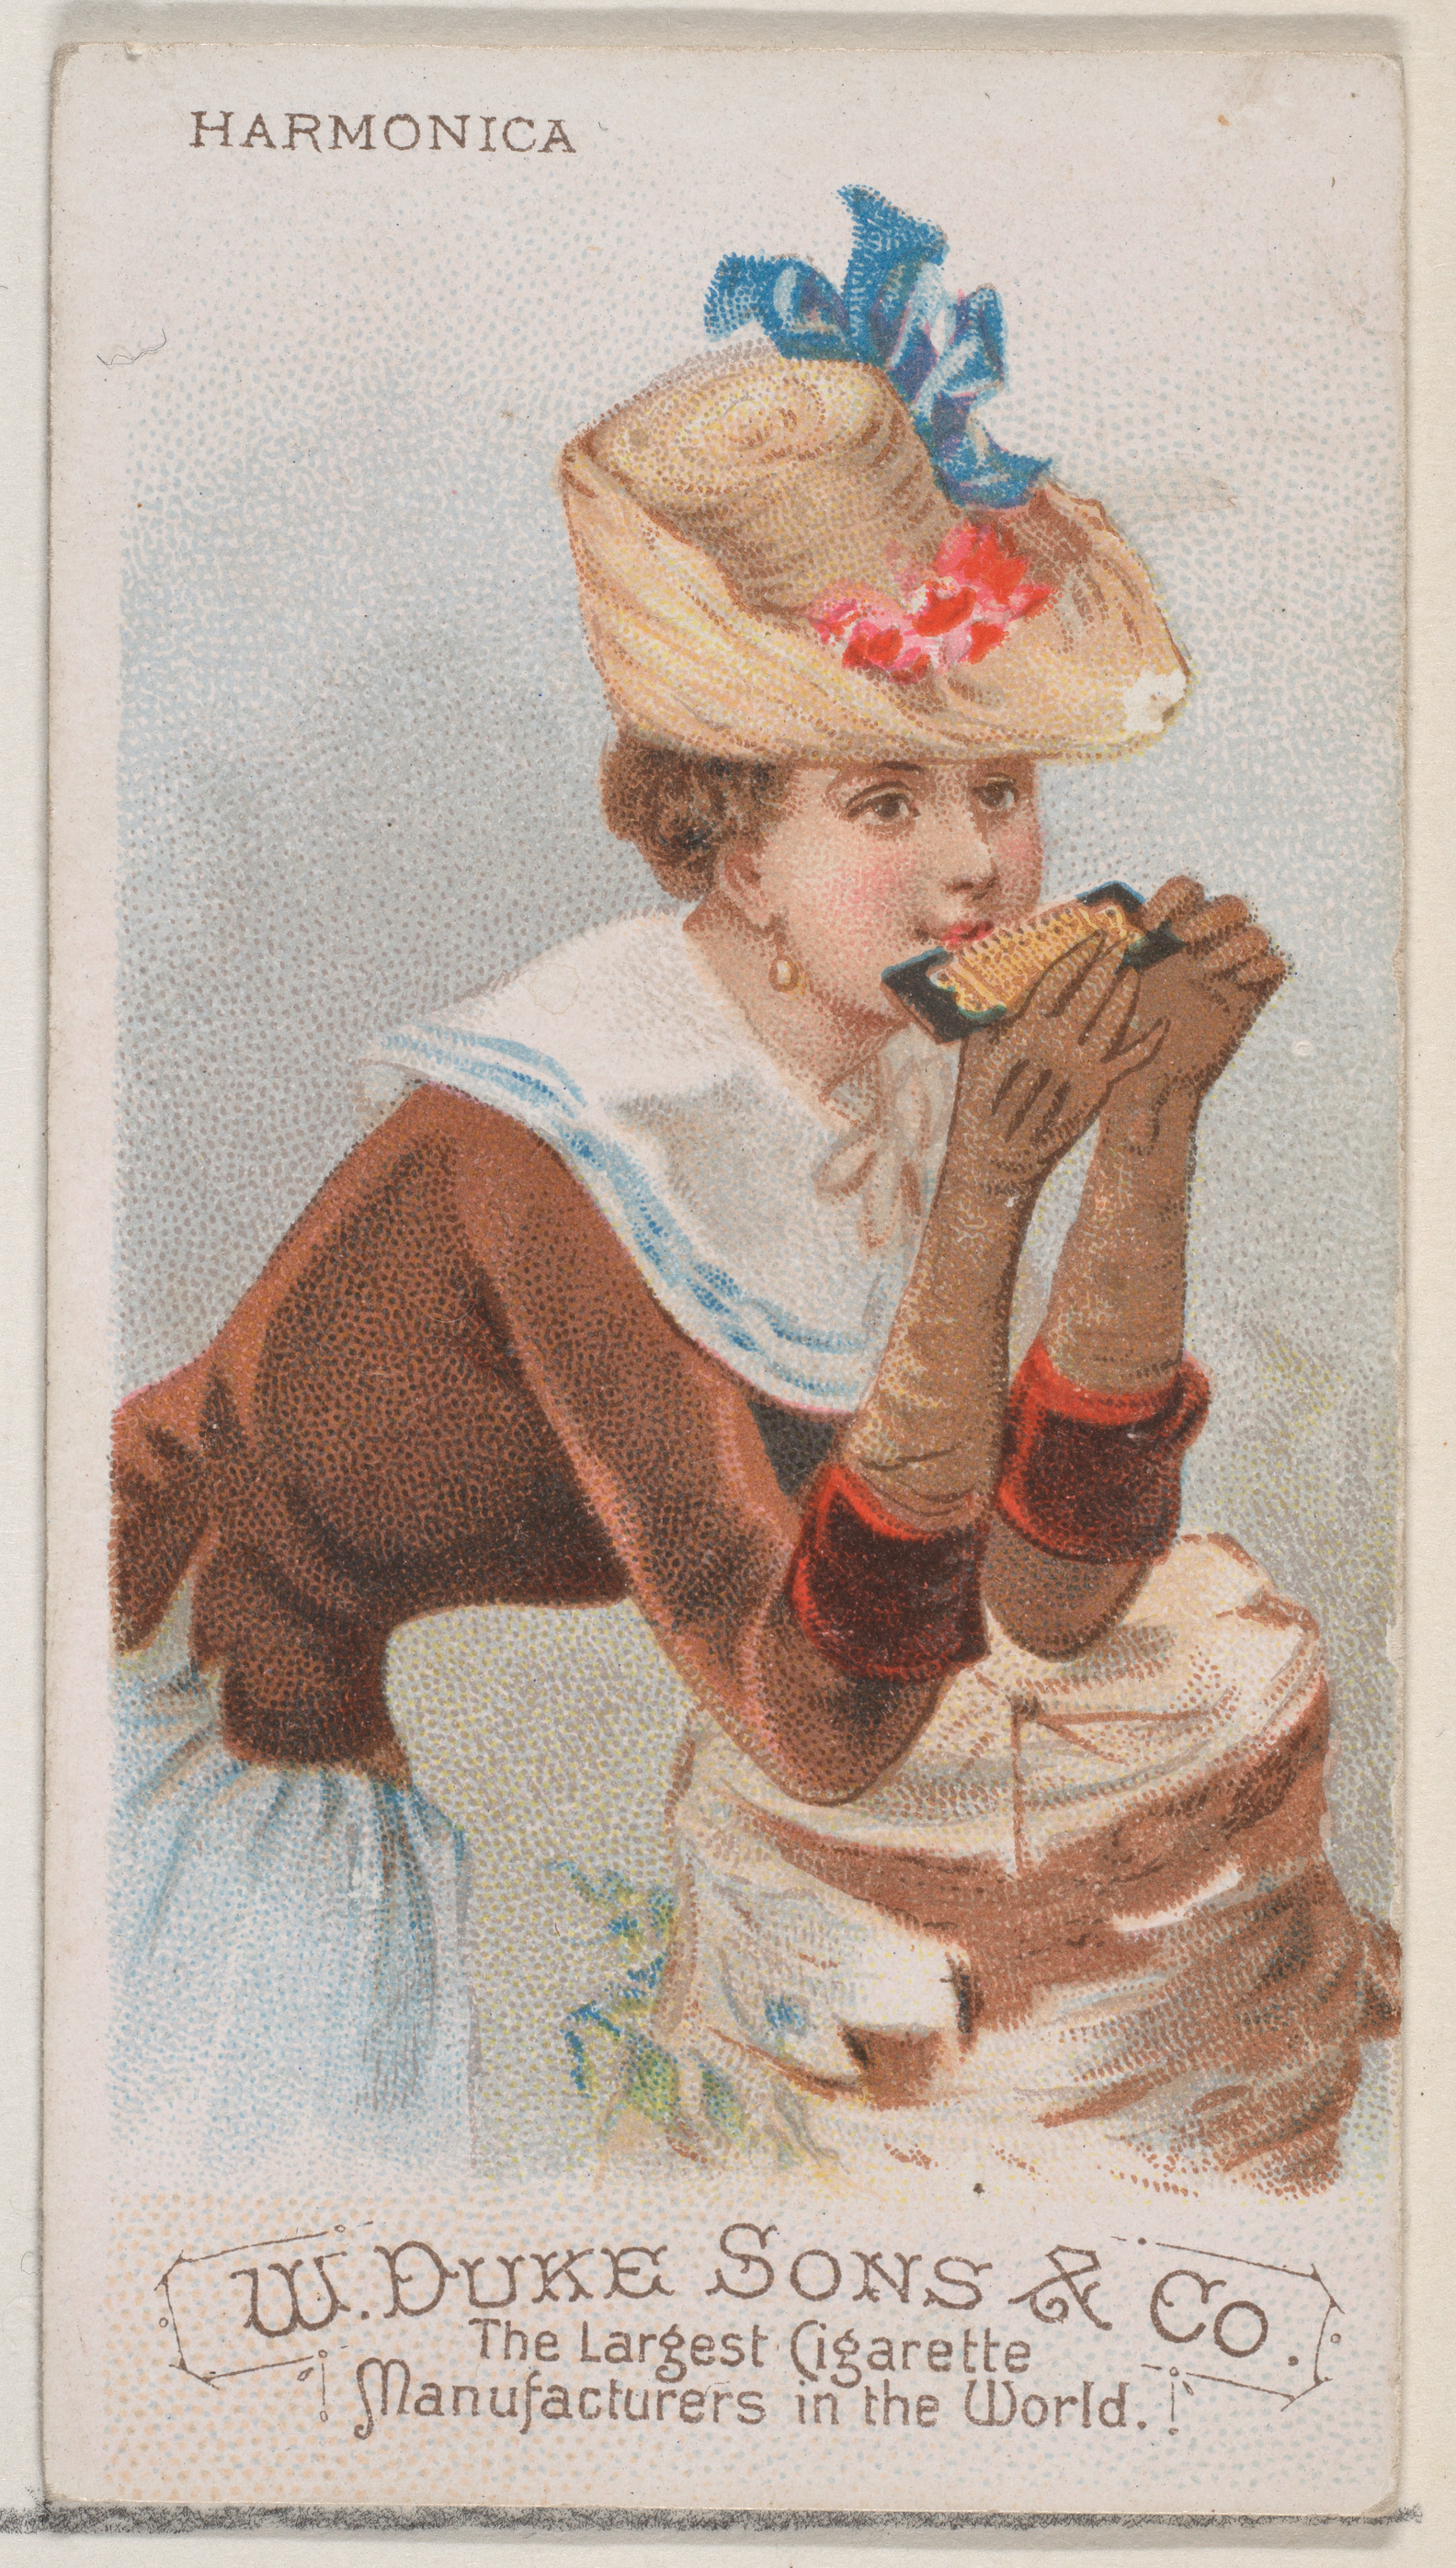 Retoucheren mode Geit Issued by W. Duke, Sons & Co. | Harmonica, from the Musical Instruments  series (N82) for Duke brand cigarettes | The Metropolitan Museum of Art